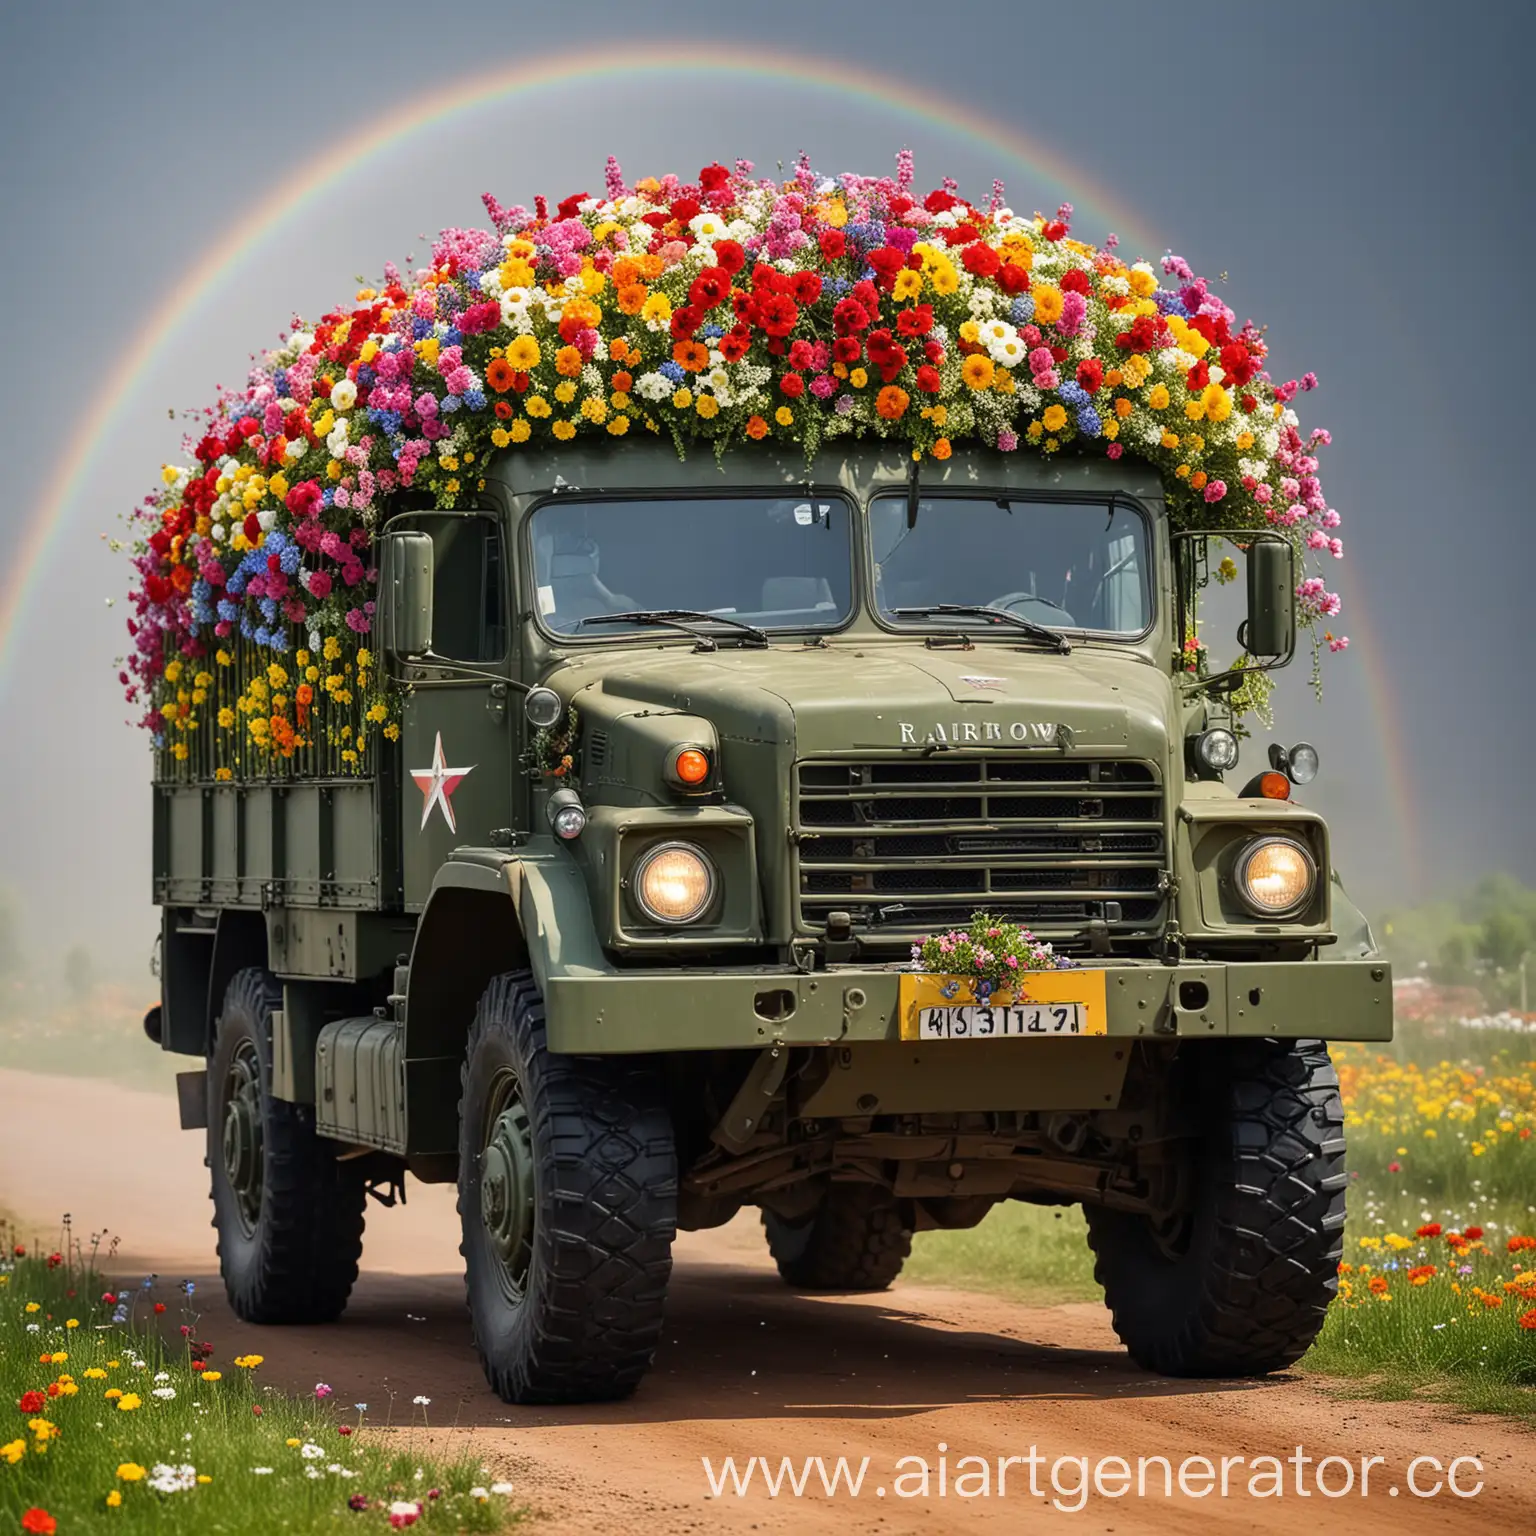 Colorful-Flowers-and-Rosettes-Adorn-Military-Truck-Under-Rainbow